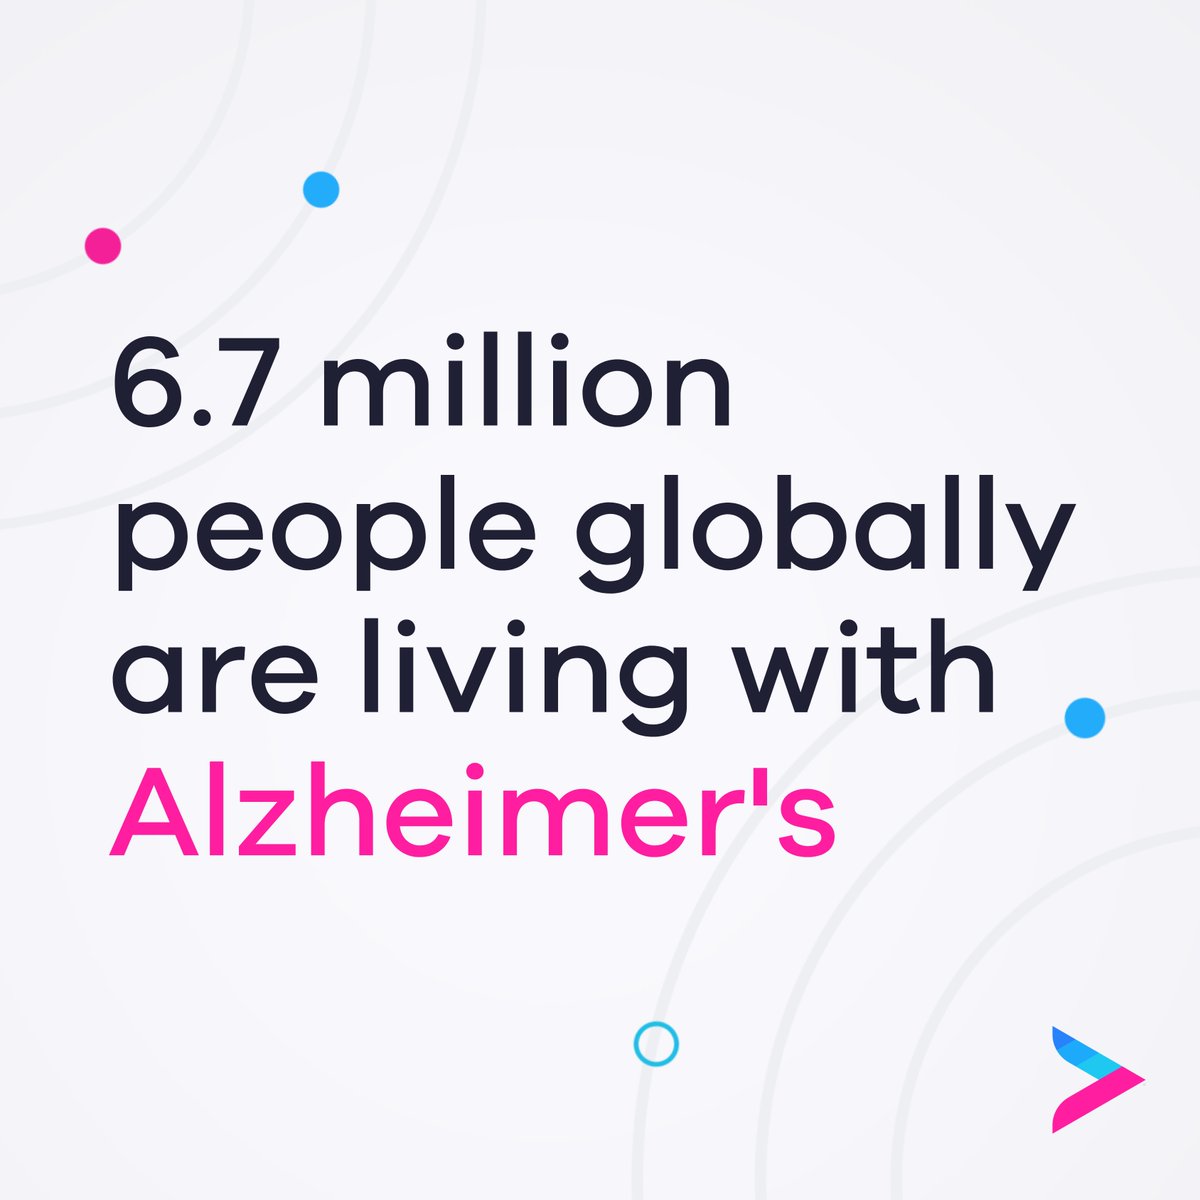 June is Alzheimer's and Brain Awareness Month. This month, Medefy stands with those suffering from Alzheimer's and their devoted loved ones.
#AlzheimersAwareness #DementiaAwareness #EndAlz #MedefyHealth #Healthcare #HealthBenefits #HealthcareNavigation #HRManagement #HRSolutions